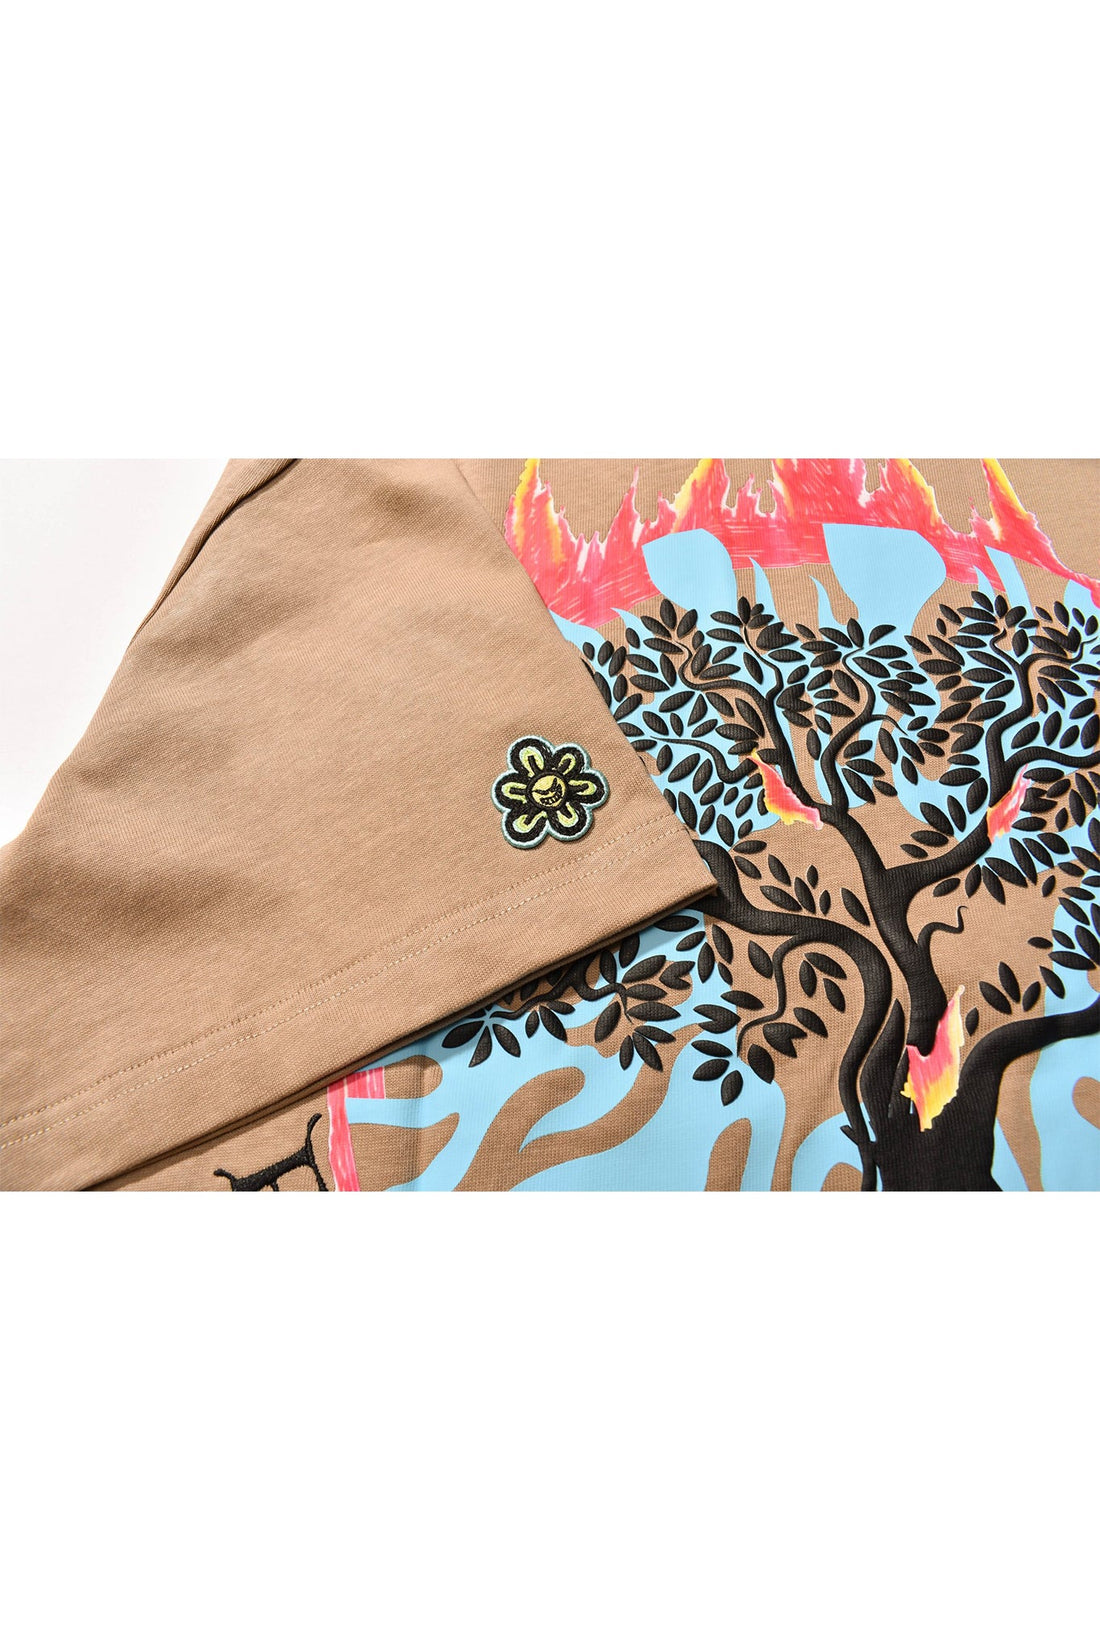 SACRED TREE T-SHIRT BEIGE Acupuncture